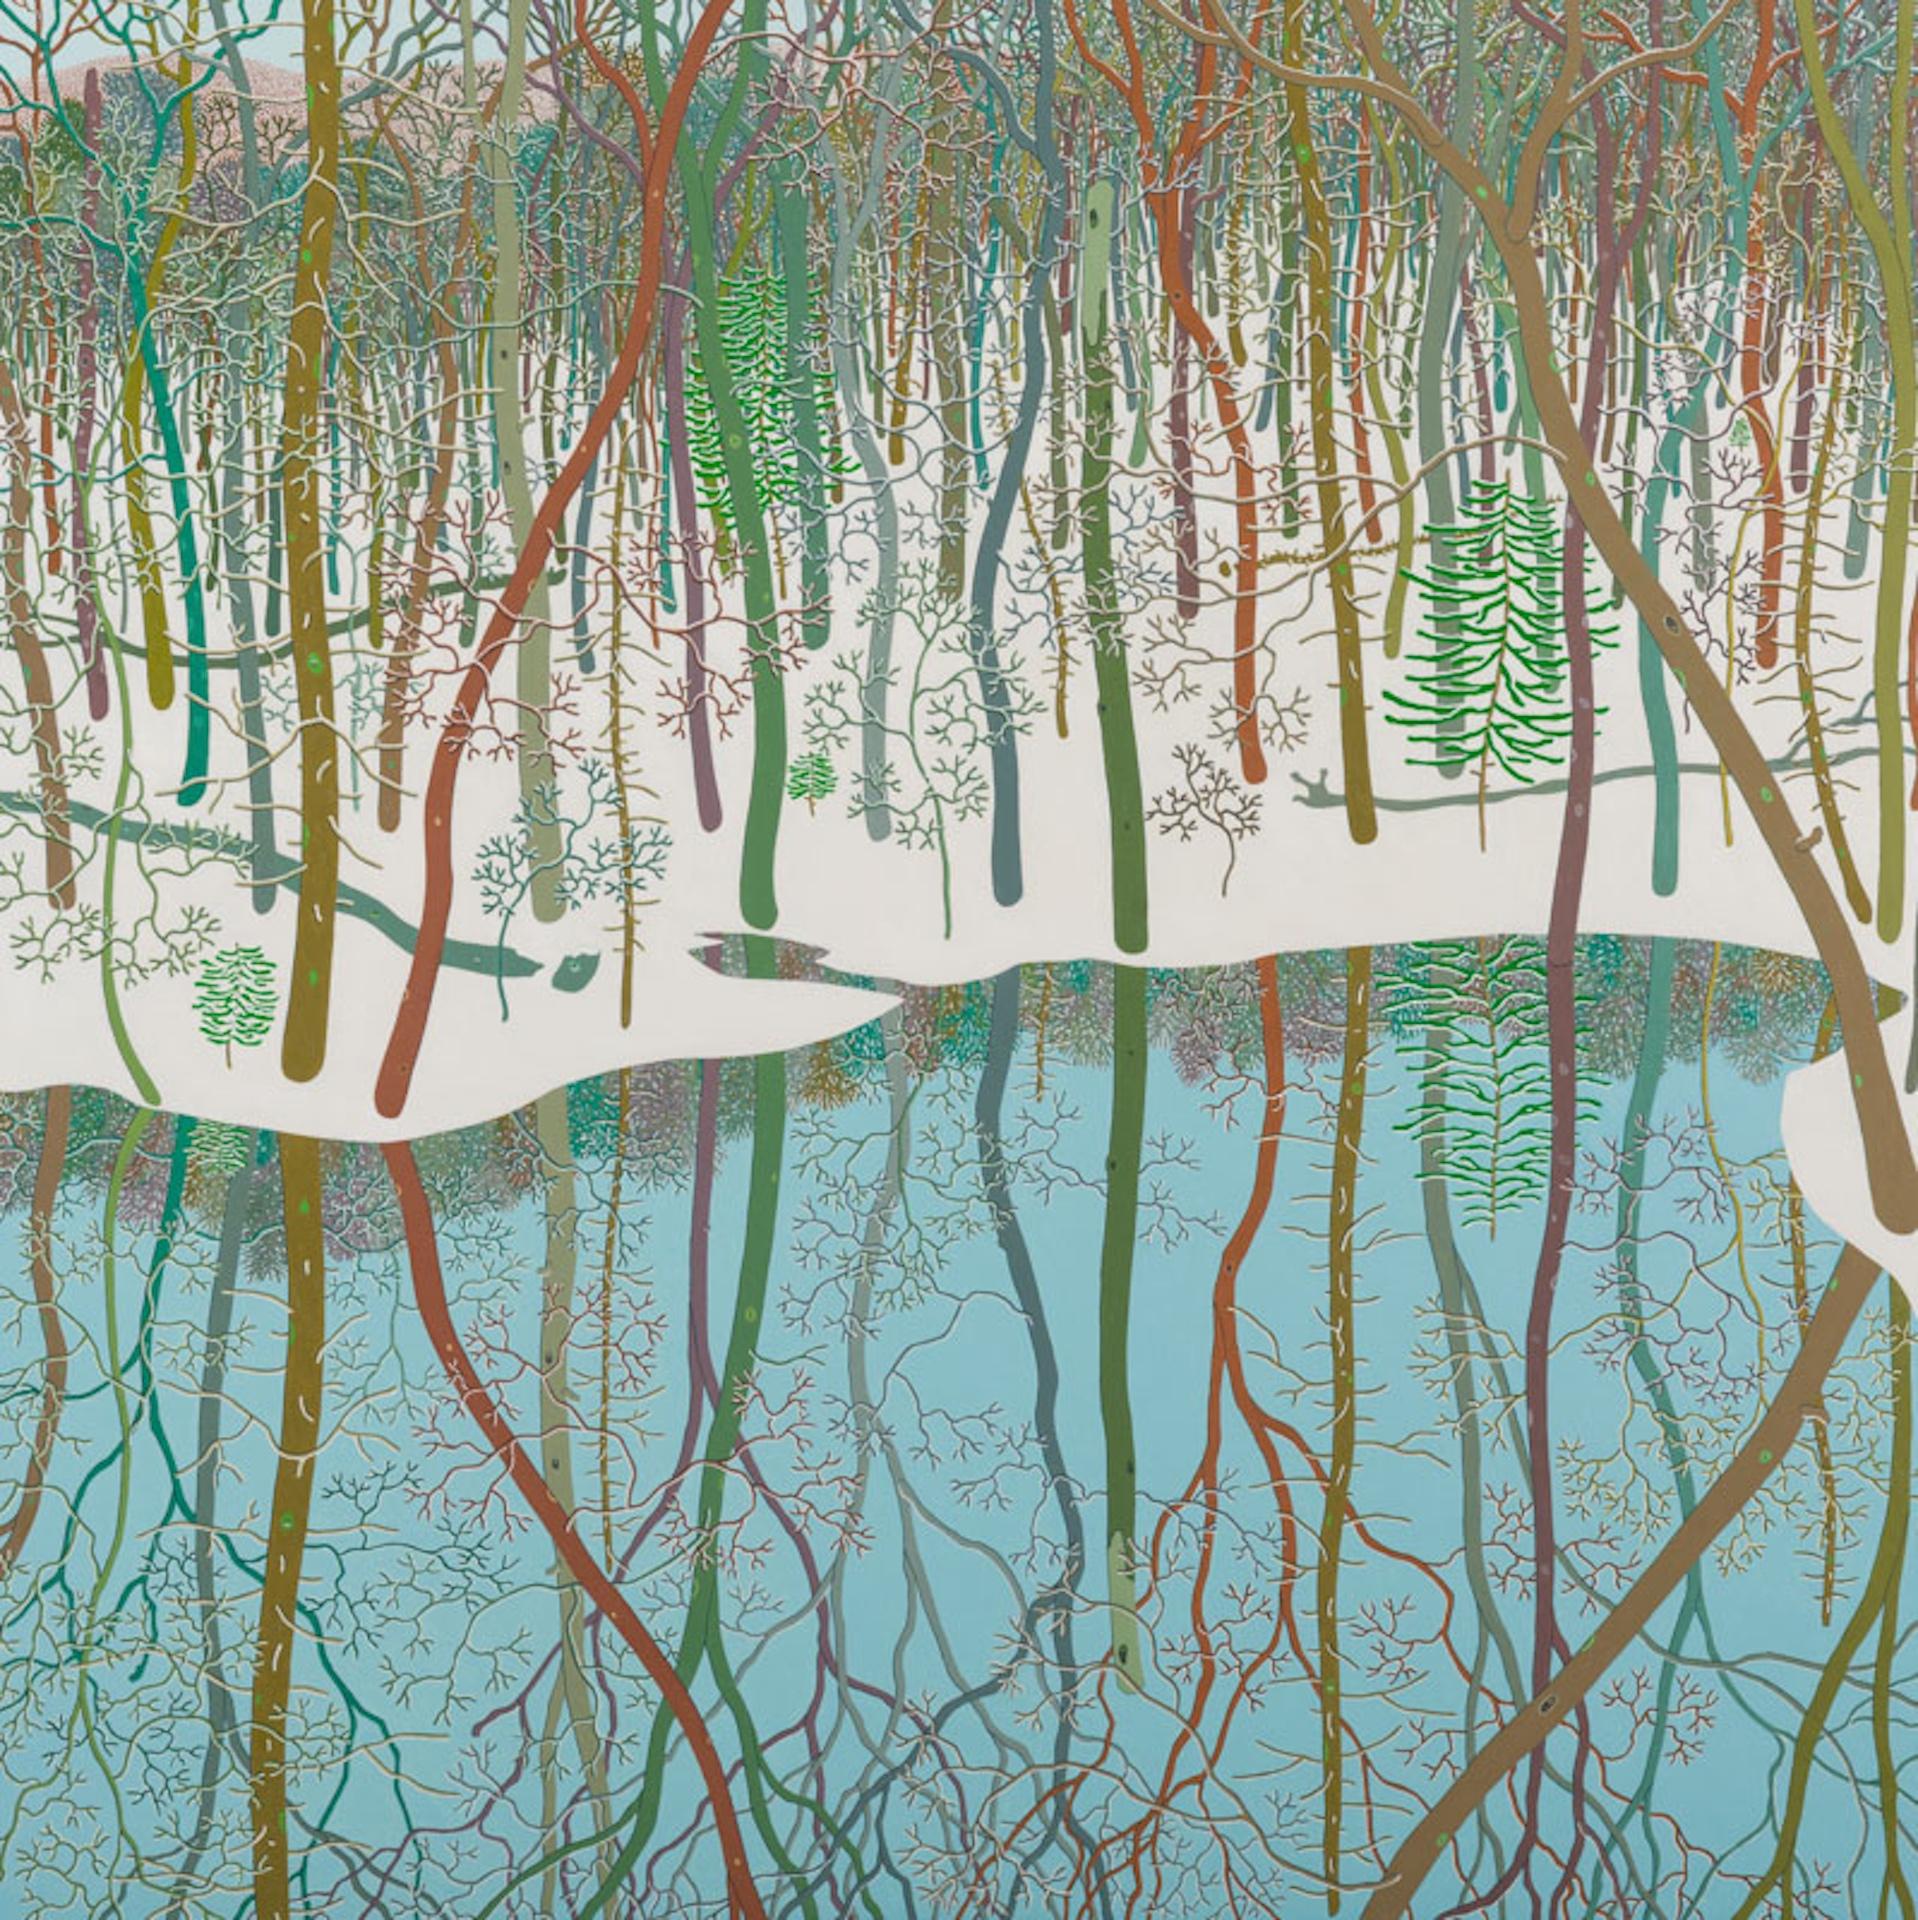 Gregory Hennen Landscape Painting - Winter Pond Wyatt Mt, February, Landscape, Snowy Woods, Water, Trees, White Snow